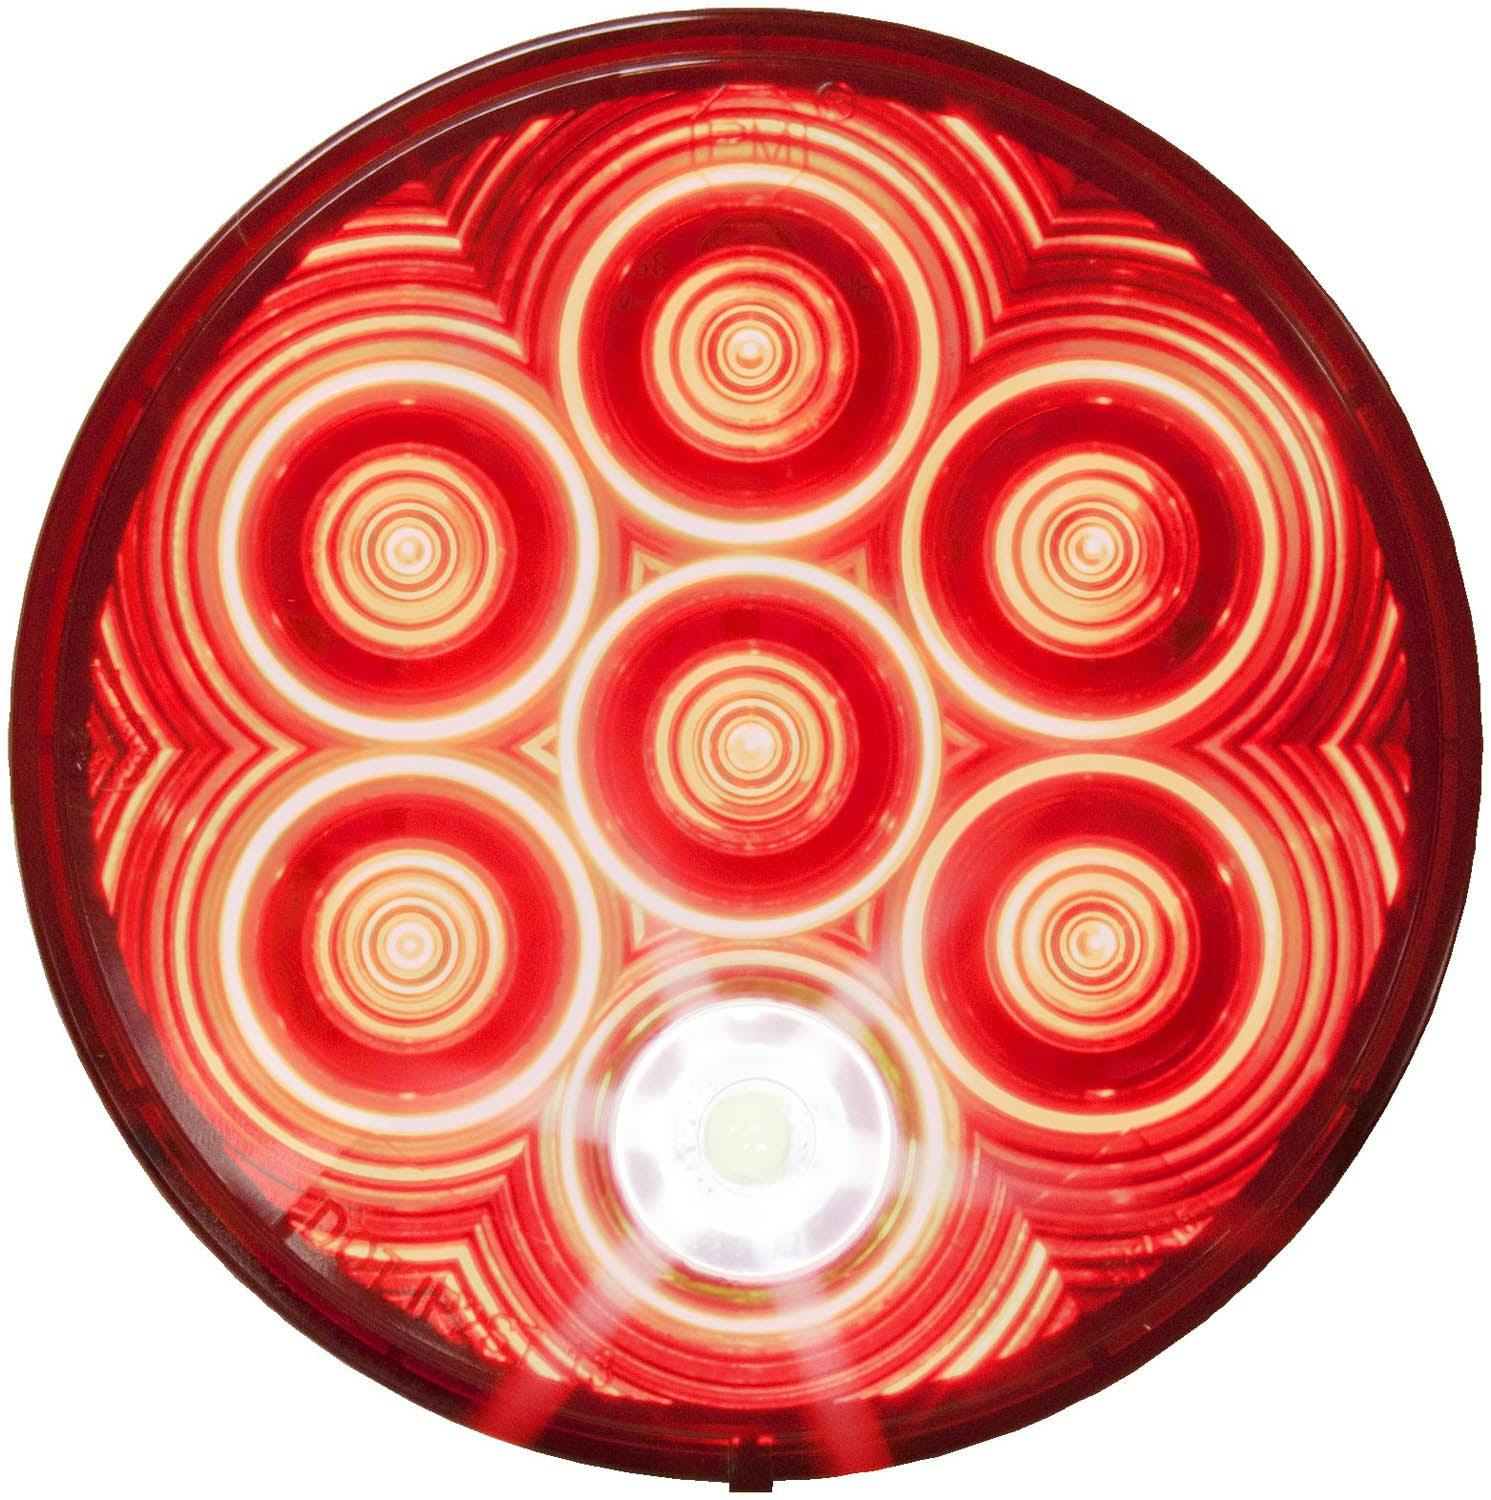 LED Stop/Turn/Tail, & Back-Up Light, Round, Grommet-Mount w/ Plug, Kit 4", red + white (Pack of 6)